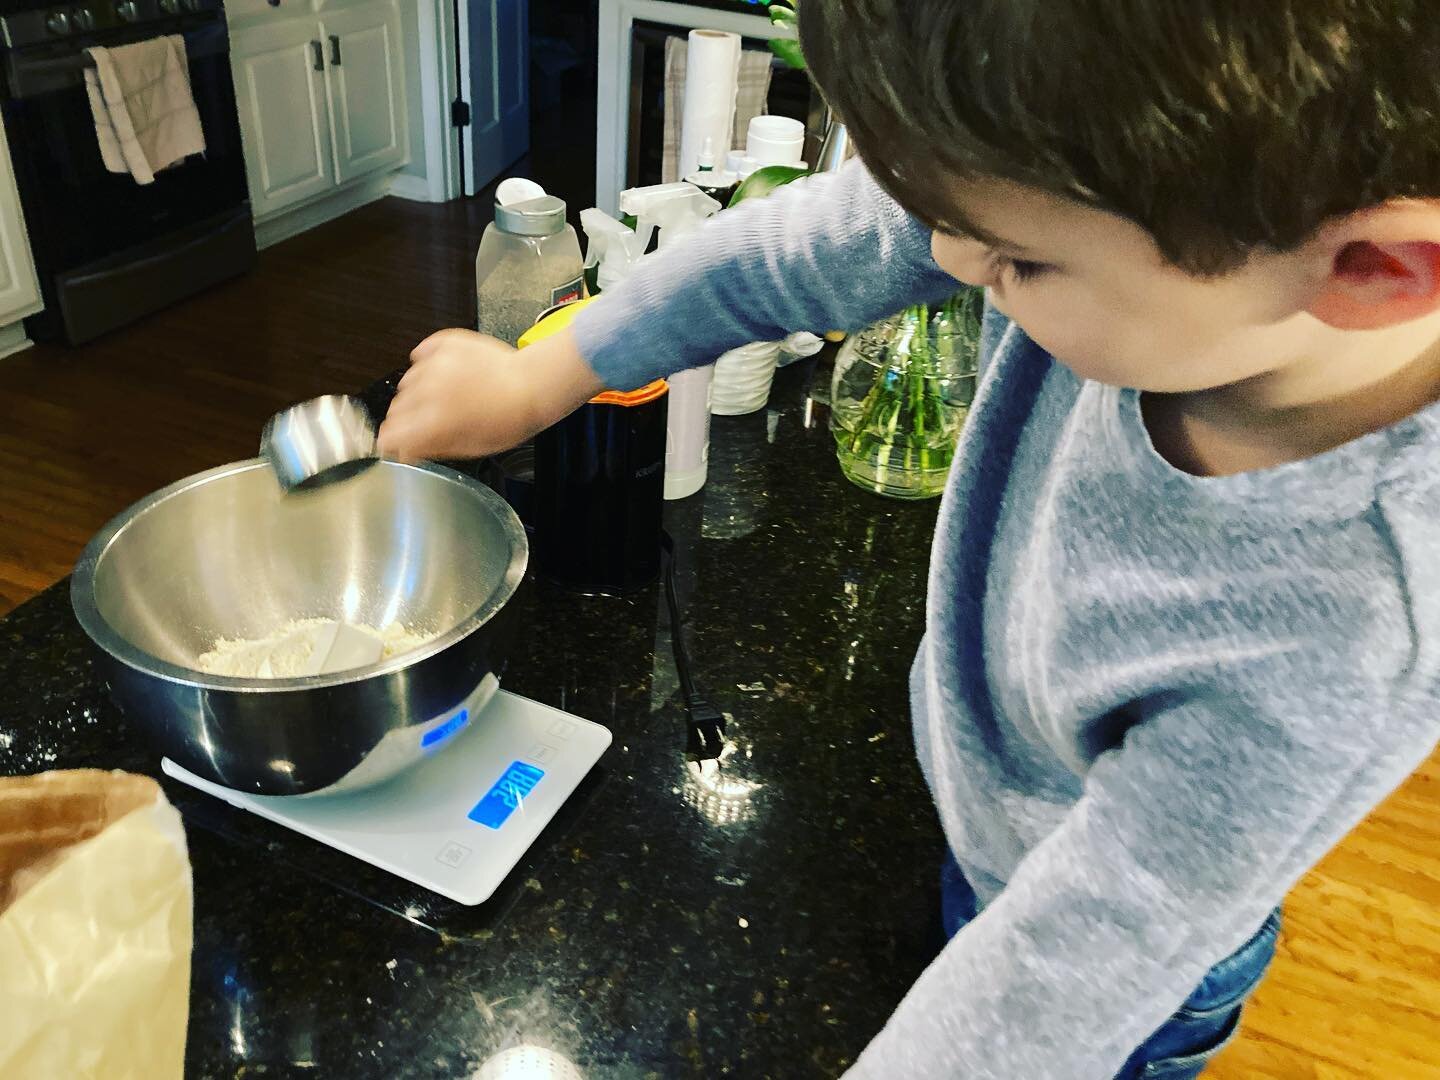 Henri wanted bagels this morning, so that&rsquo;s what we delivered! He was a great helper measuring the flour and yeast. We gobbled them up pretty fast that I missed taking a photo of the finished product.😬 They were not too hard to make and turned